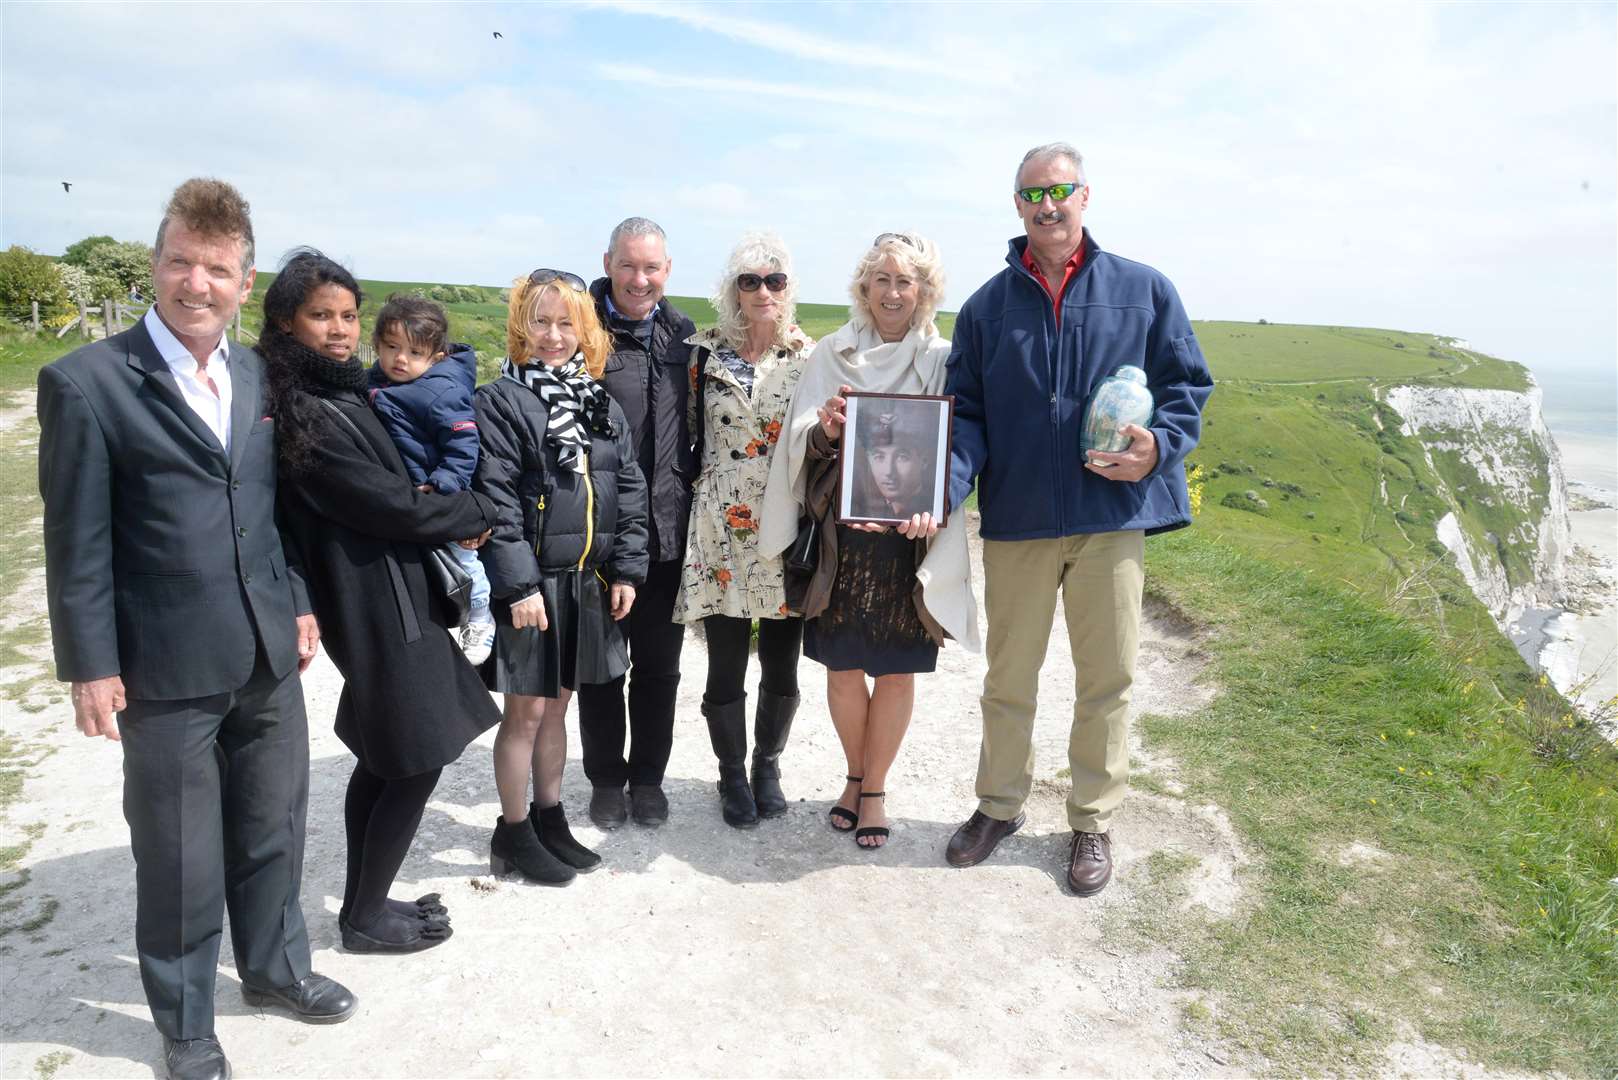 Paul Reynolds, nephew, Em and 18-month Alaric Reynolds, Nadya Meyers, Haydn Reynolds, nephew, Natalie Reynolds, neice, Gail Baylis, daughter and Craig Reynolds, son at the scattering of the ashes of Second World War airman Dermot Reynolds at Langdon Cliffs, Dover on Thursday. Picture: Chris Davey (2055835)